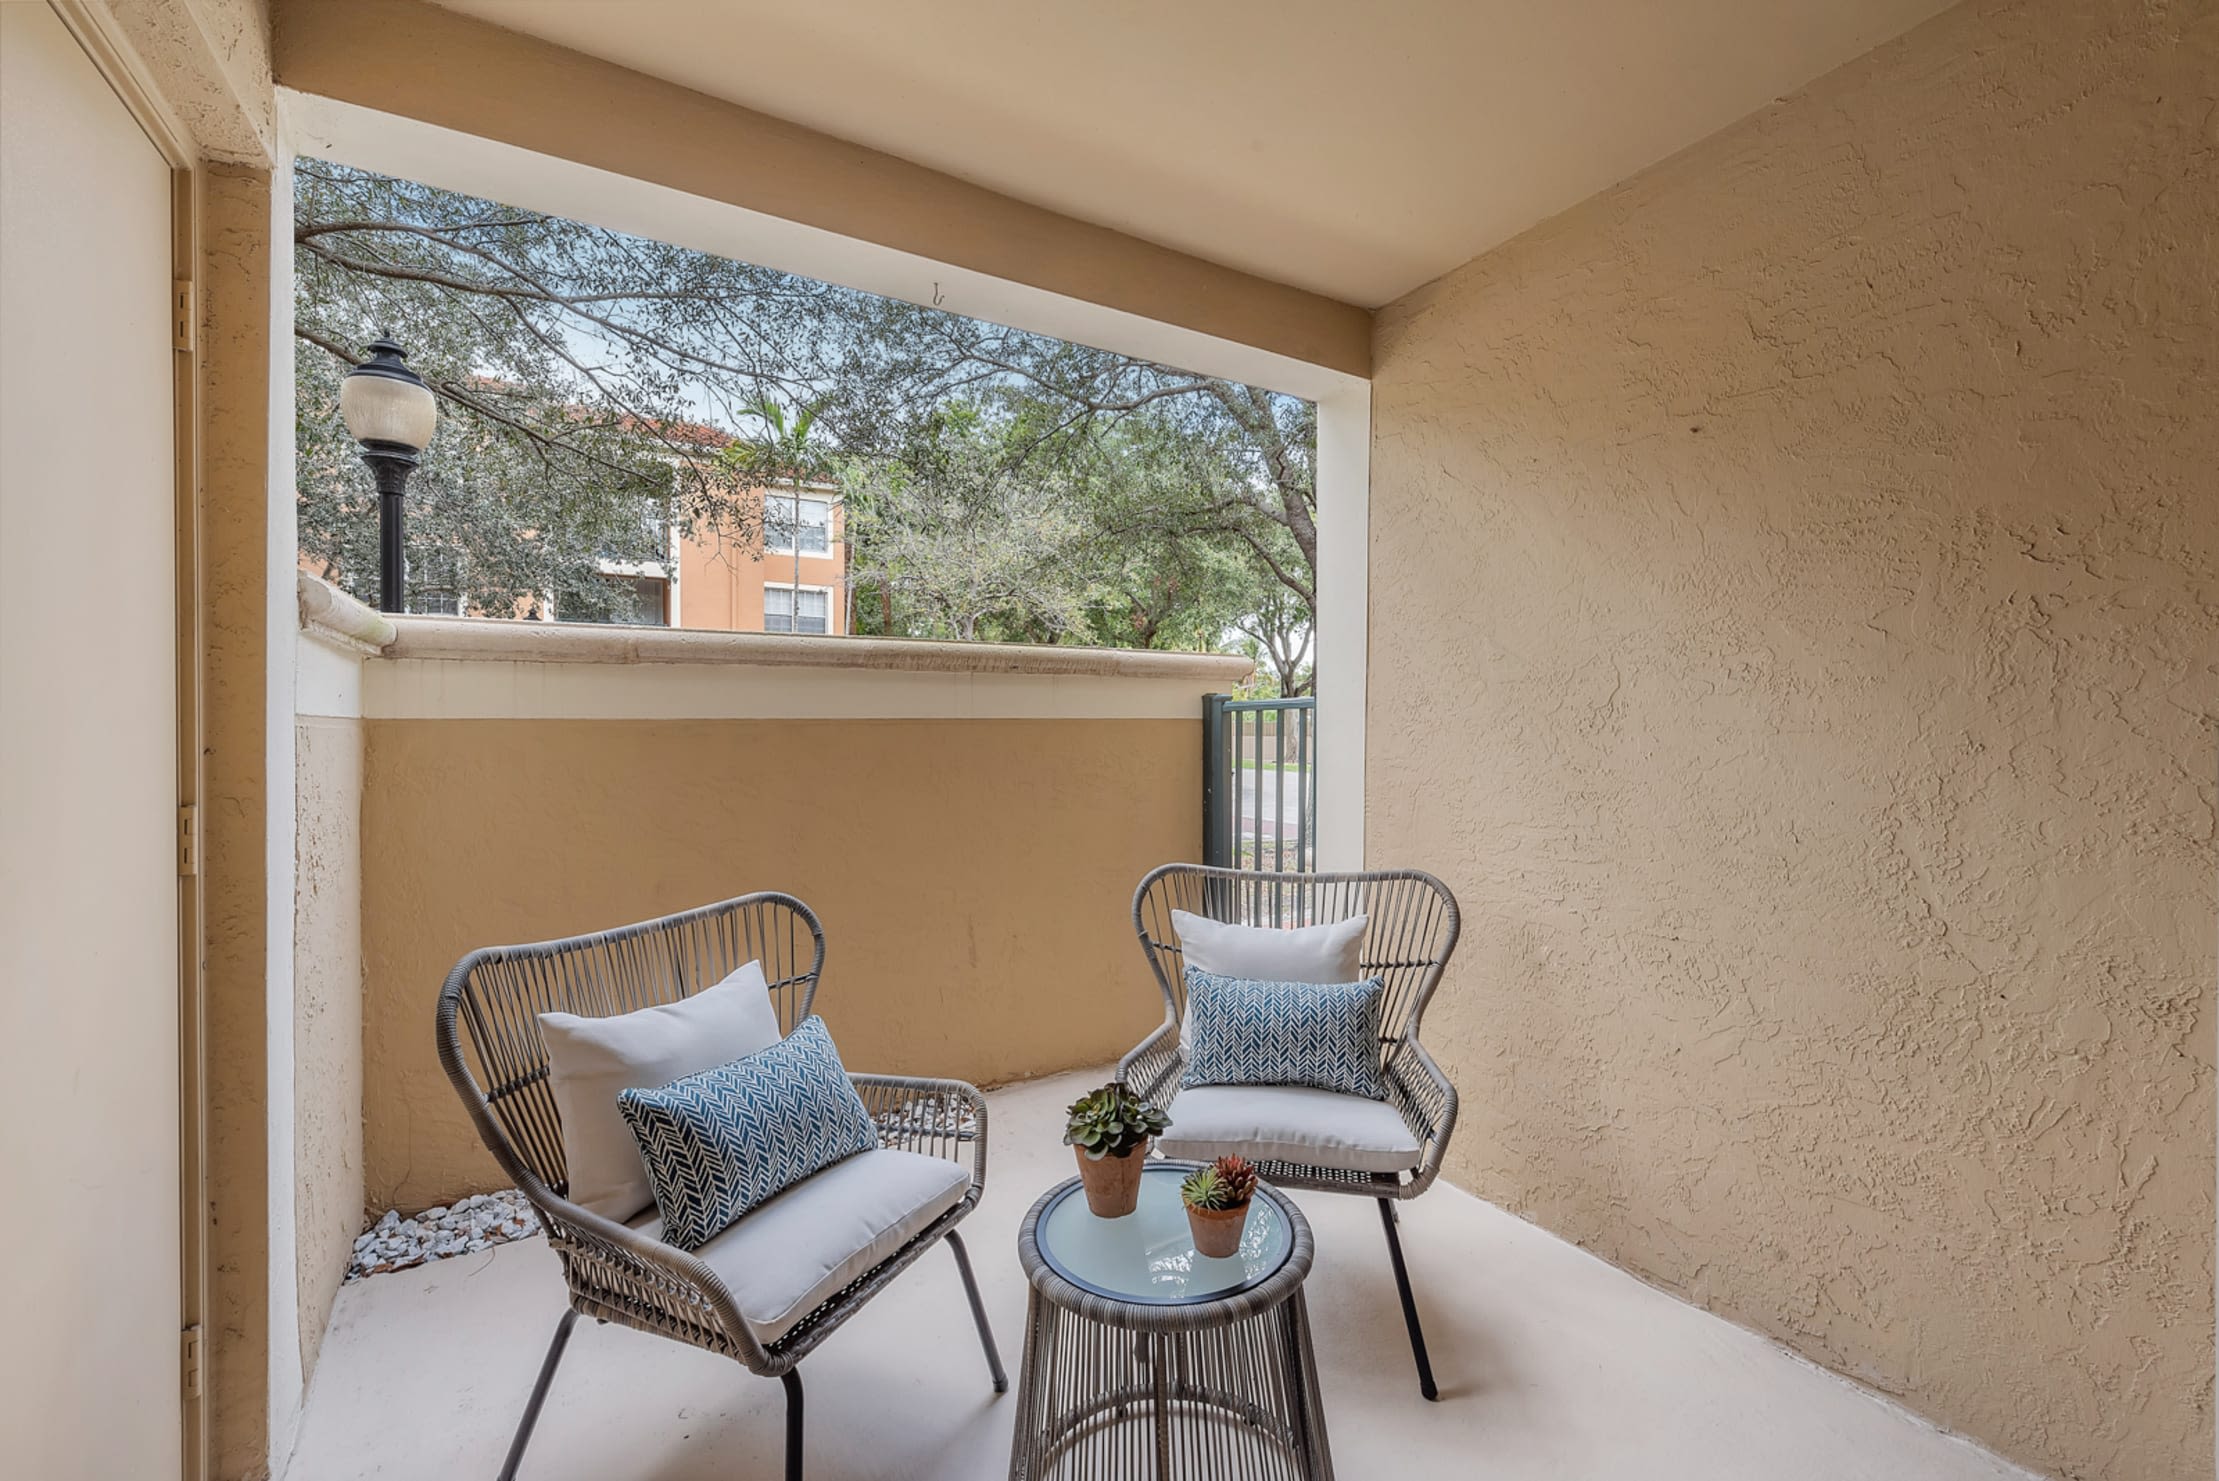 Private patio space at Crescent House Apartments in Miami Lakes, Florida